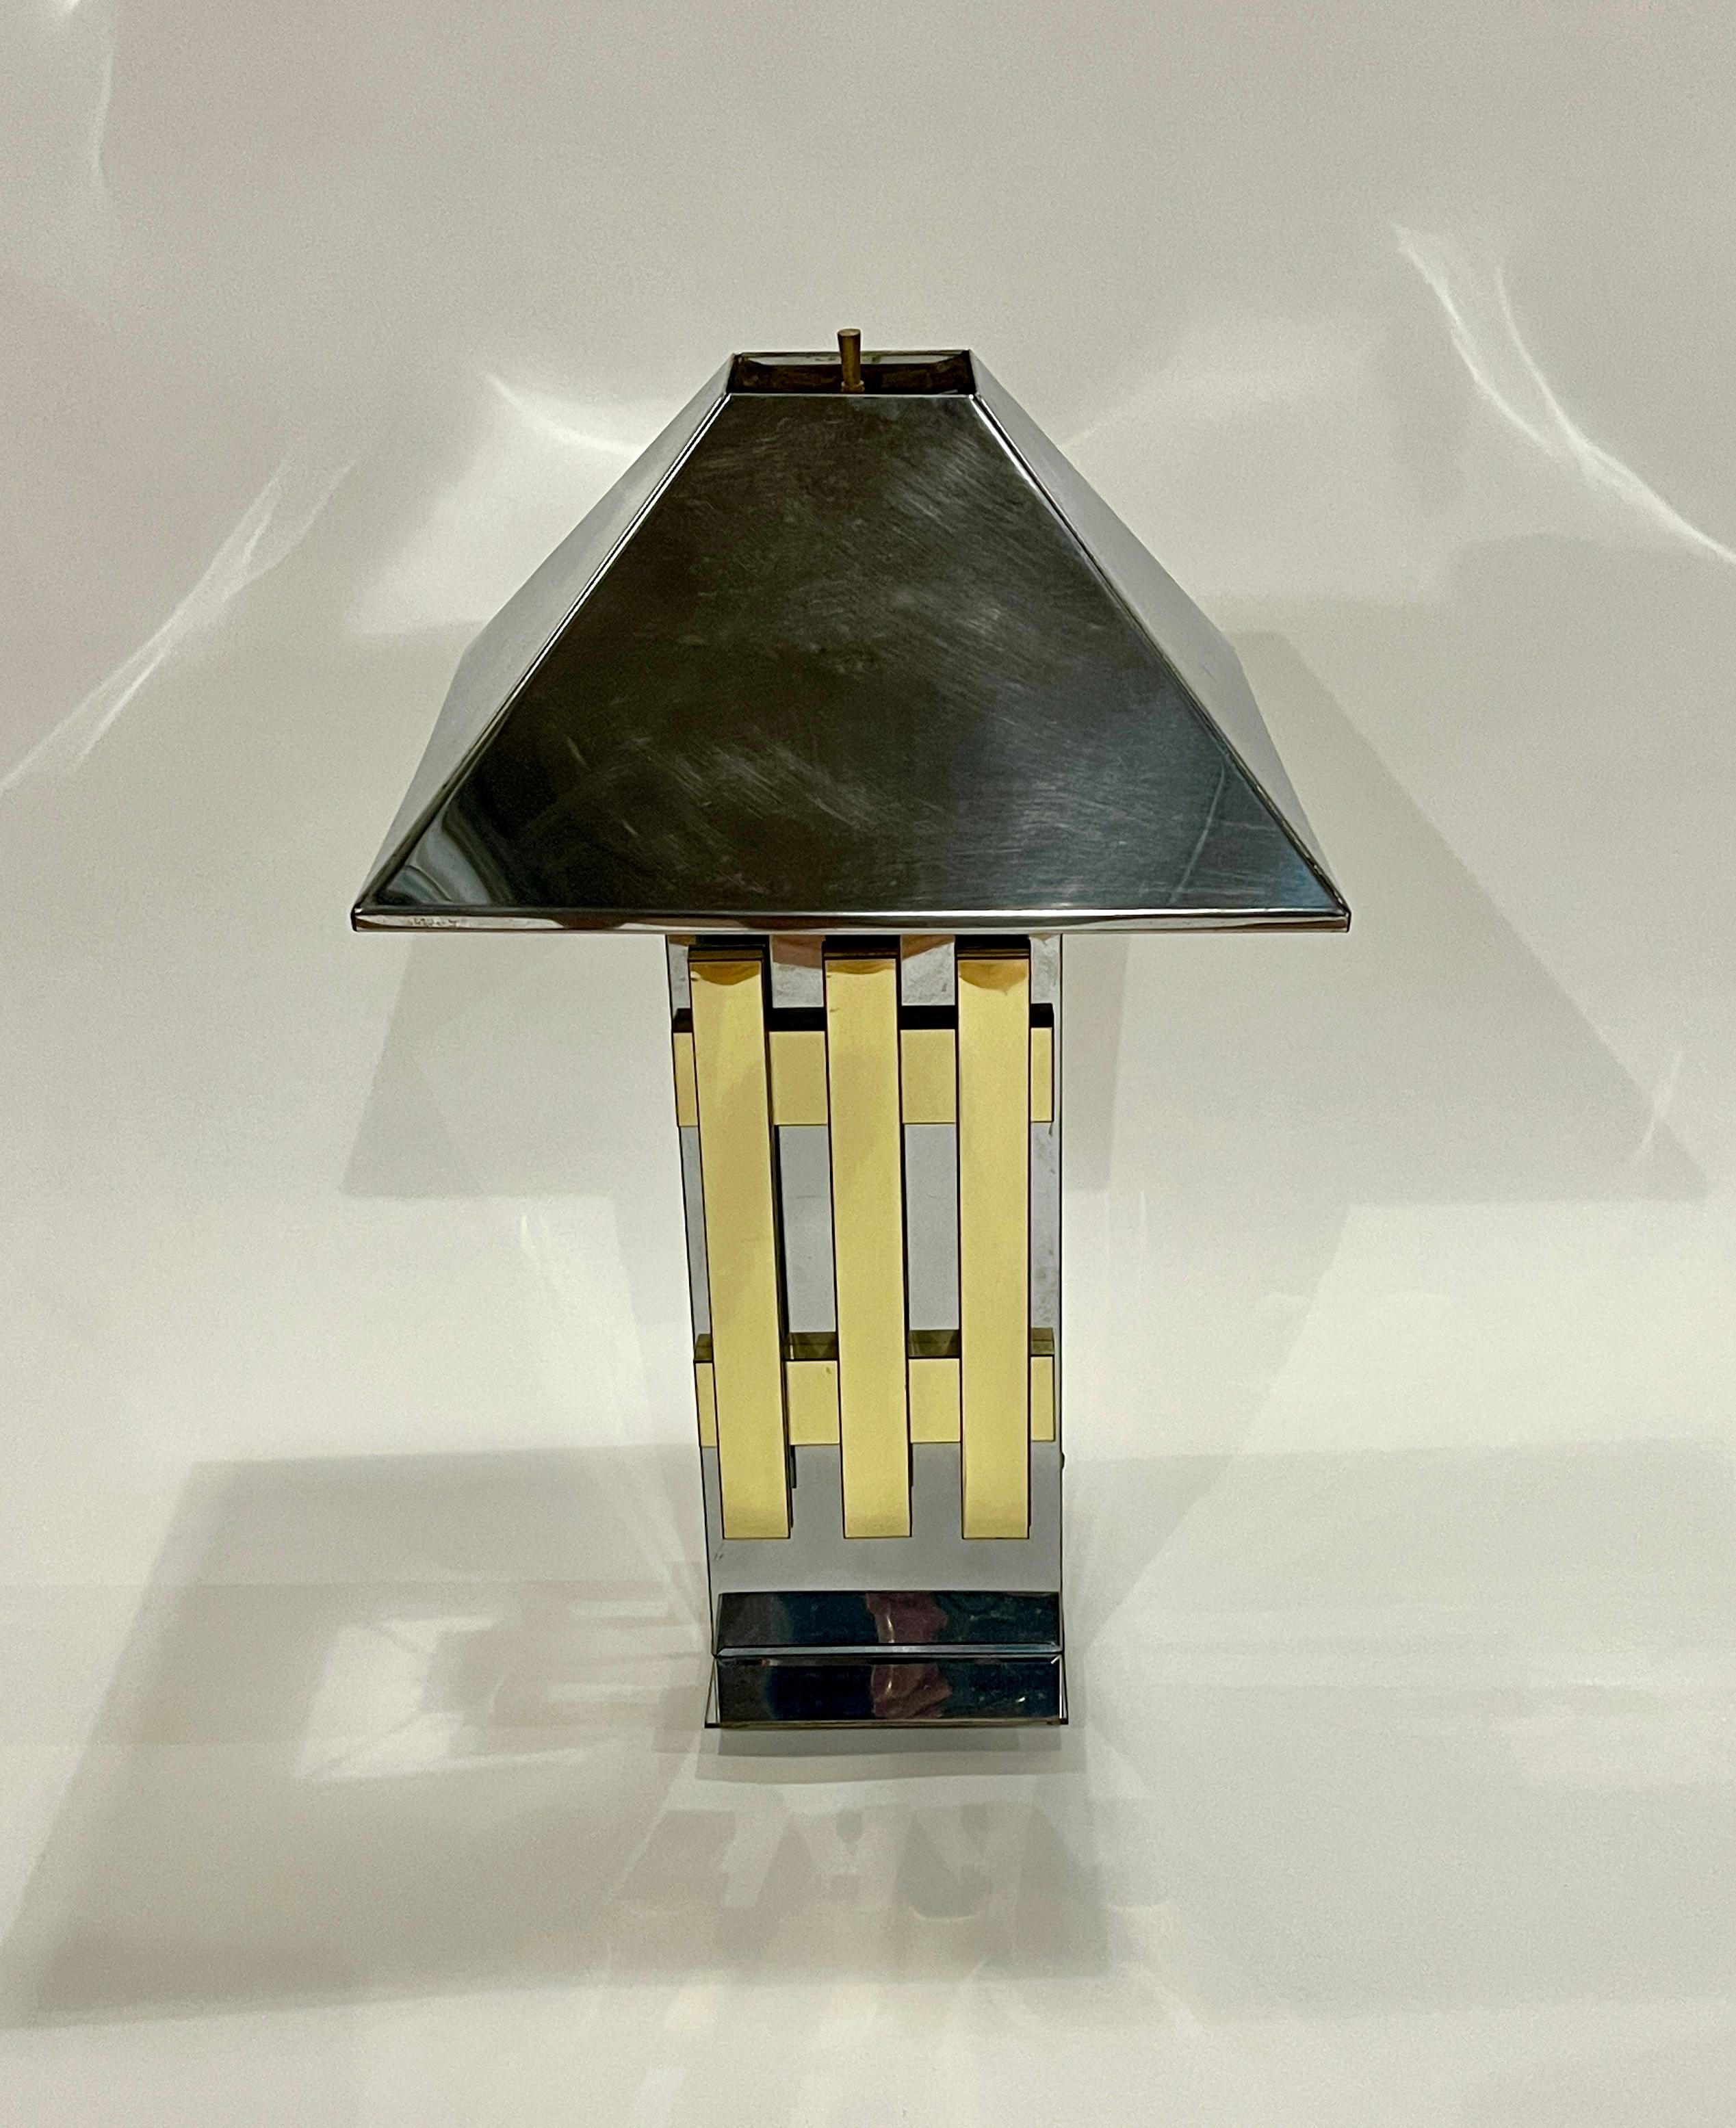 Sculptural mid-century modern table lamp made of chrome and brass with a metal shade in the style of Romeo Rega or Curtis Jere. Wired for US electricity and in working order. 